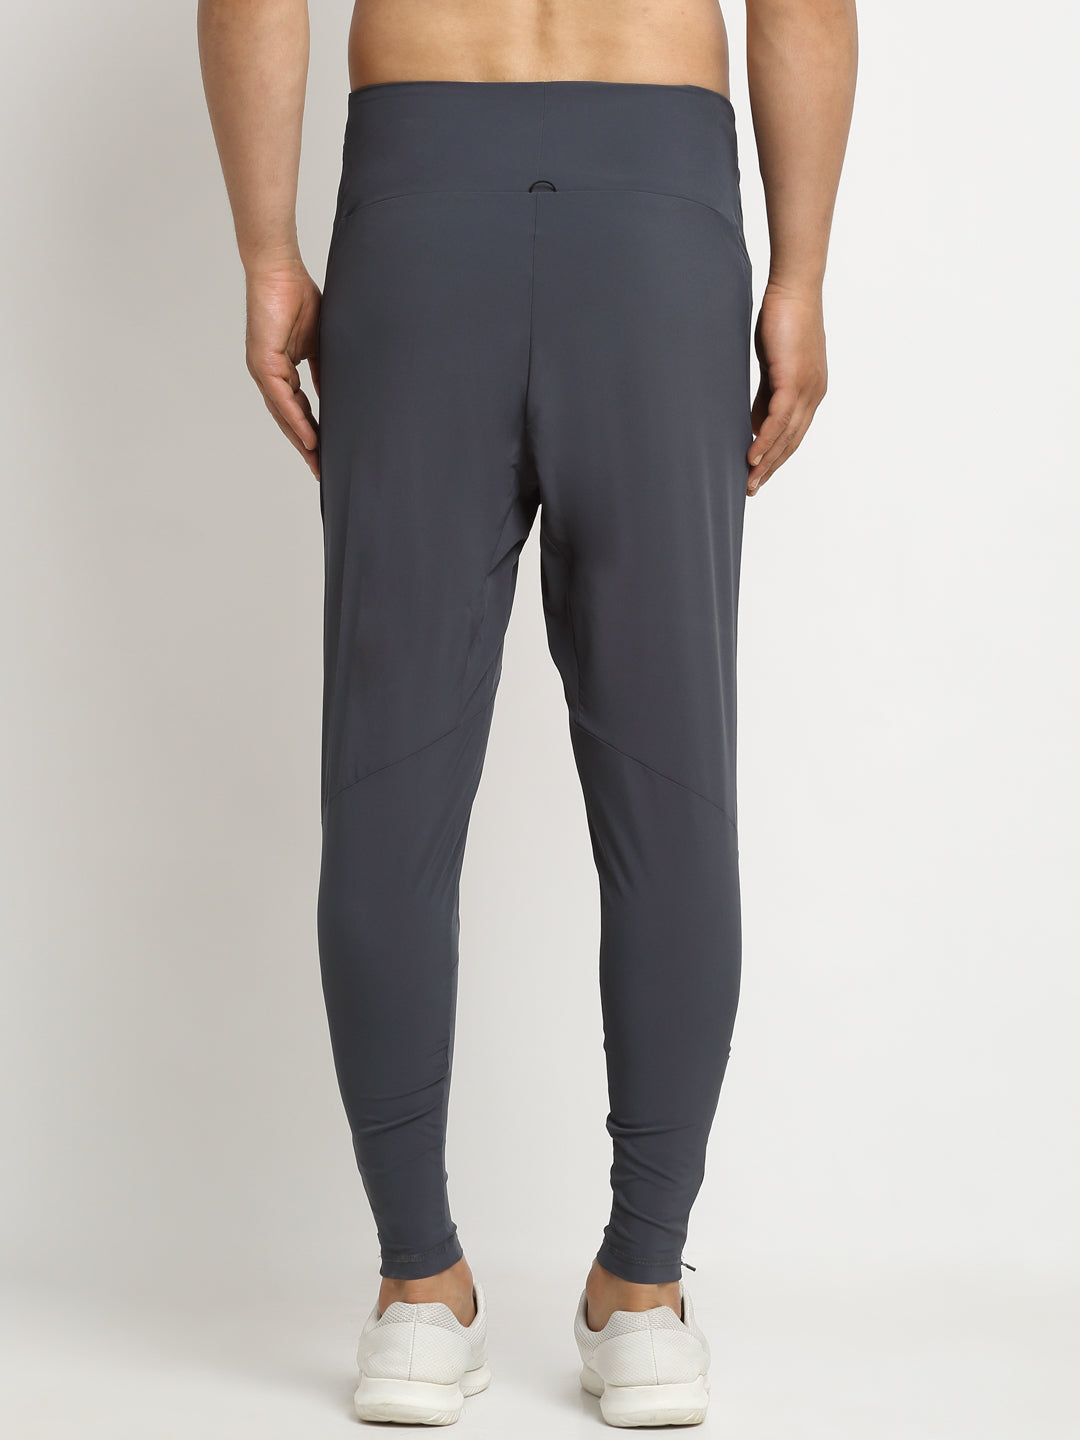 Buy Mens Stretch Twill Jogger Pants Online India  Ubuy